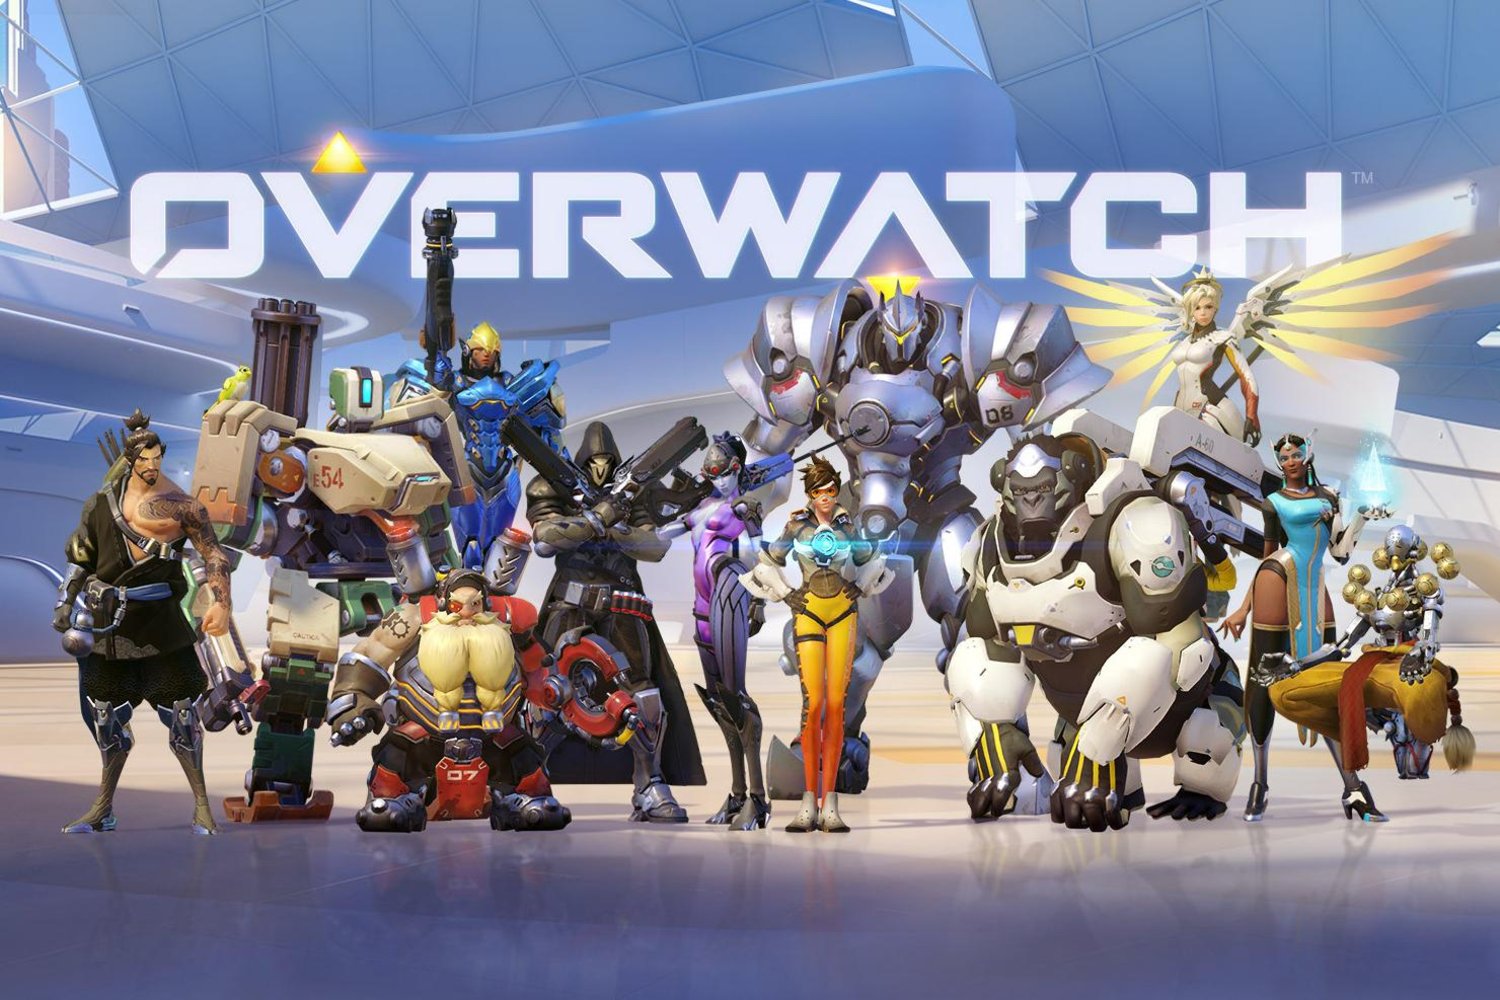 https://www.topmarket.co.il/images/detailed/27/overwatch-is-the-new-esports-shooter-game-from-blizzard.jpg